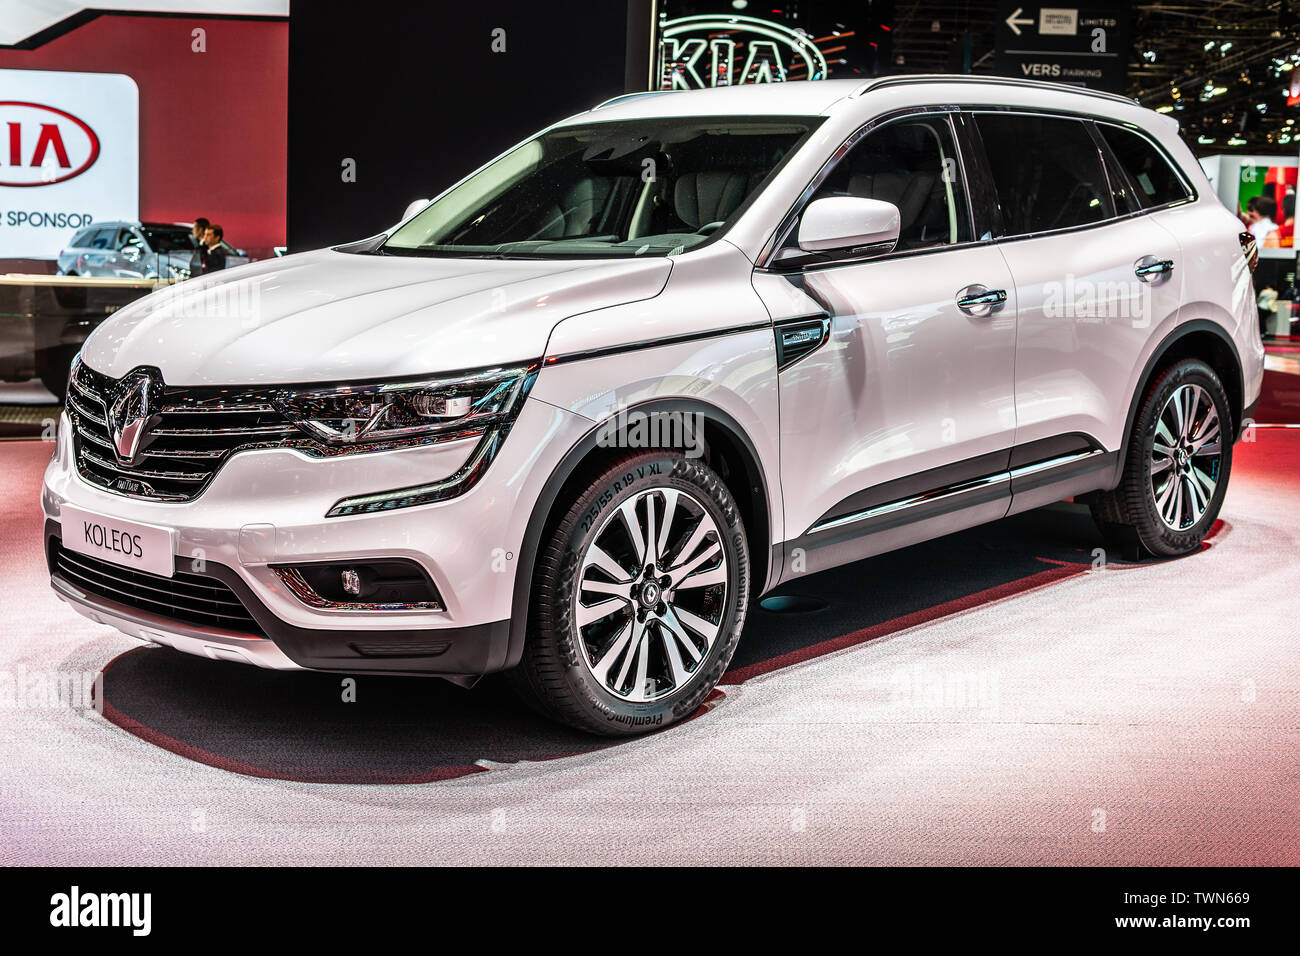 Paris, France, Oct 2018: metallic white Renault Koleos II at Mondial Paris  Motor Show, 2nd gen compact crossover SUV produced by Renault Stock Photo -  Alamy